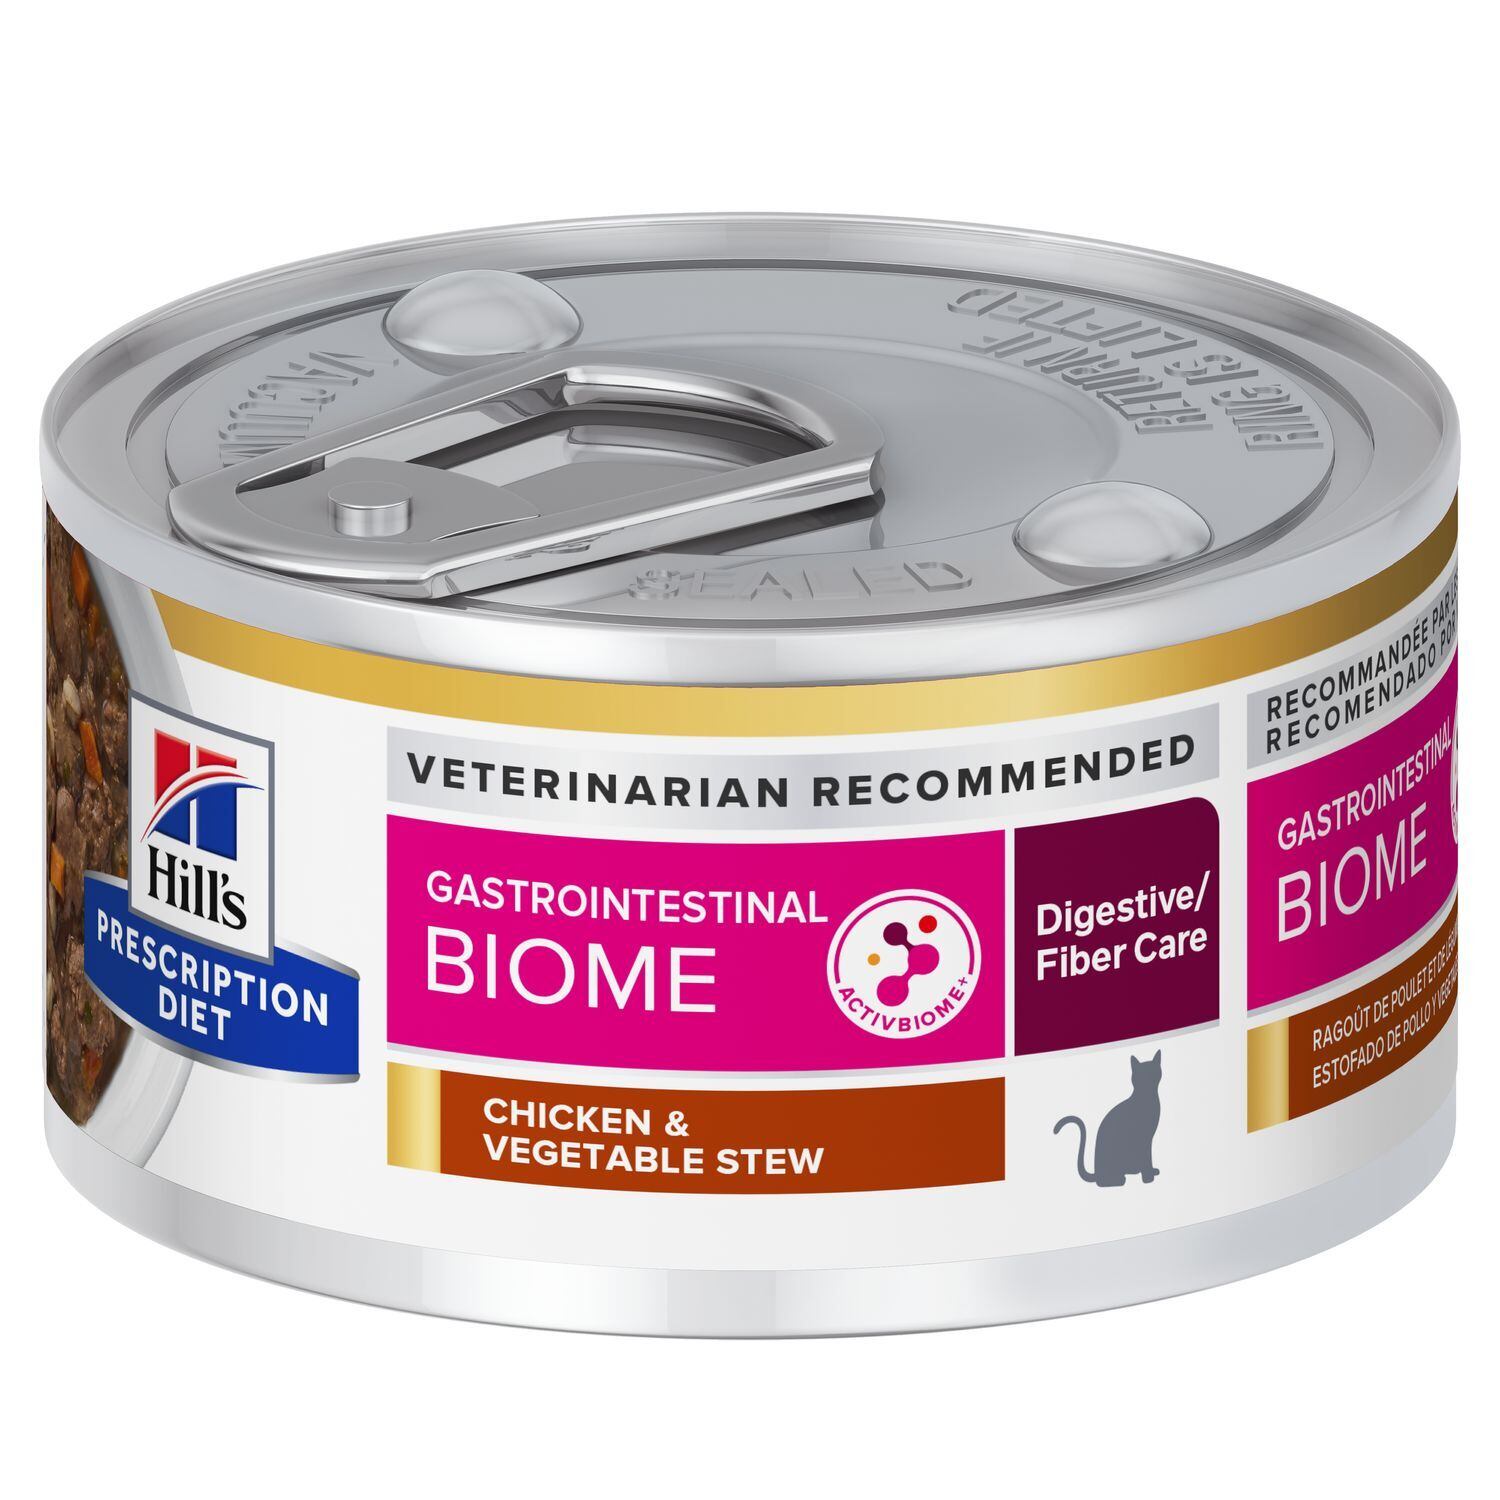 pd gastrointestinal biome feline chicken and vegetable stew canned productShot zoom